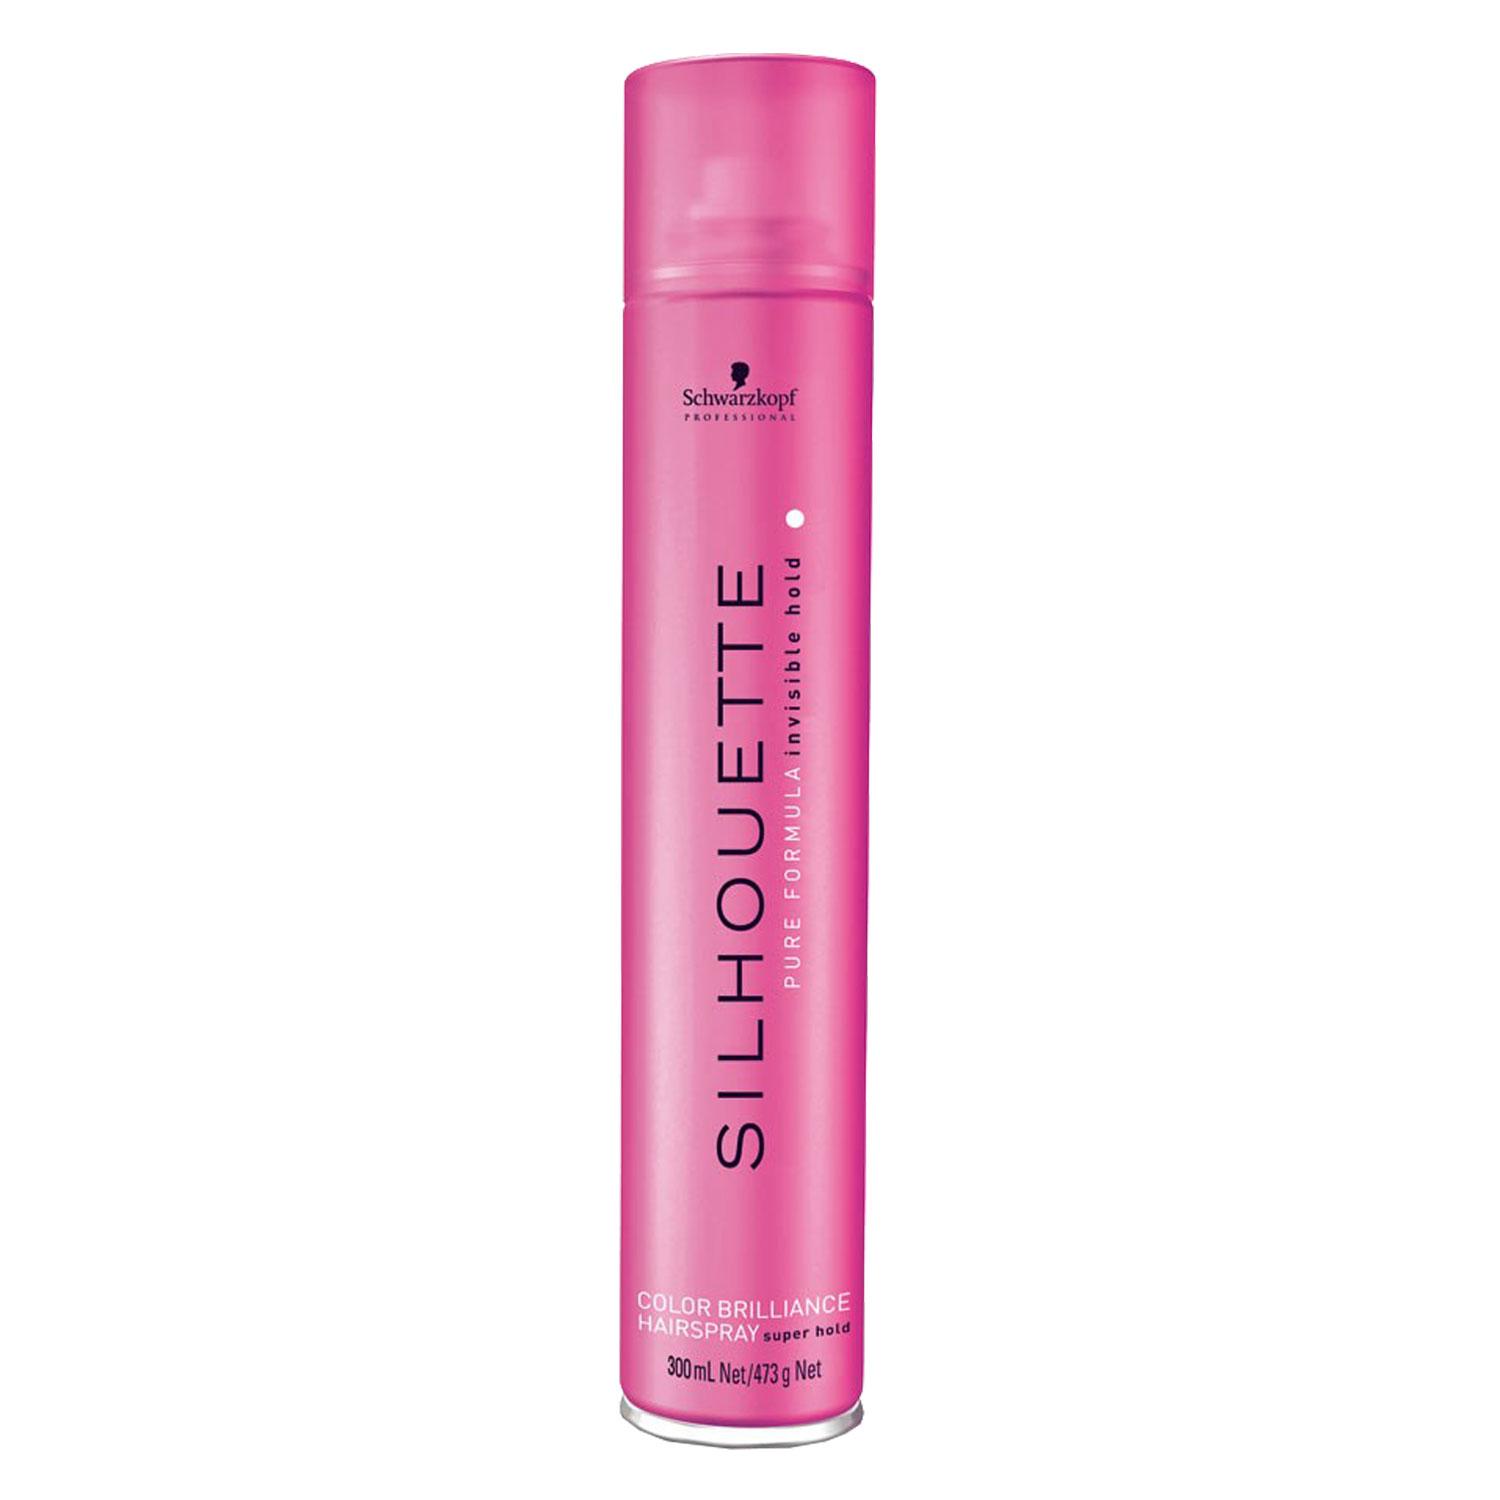 Silhouette Color Brilliance - Hairspray Super Hold